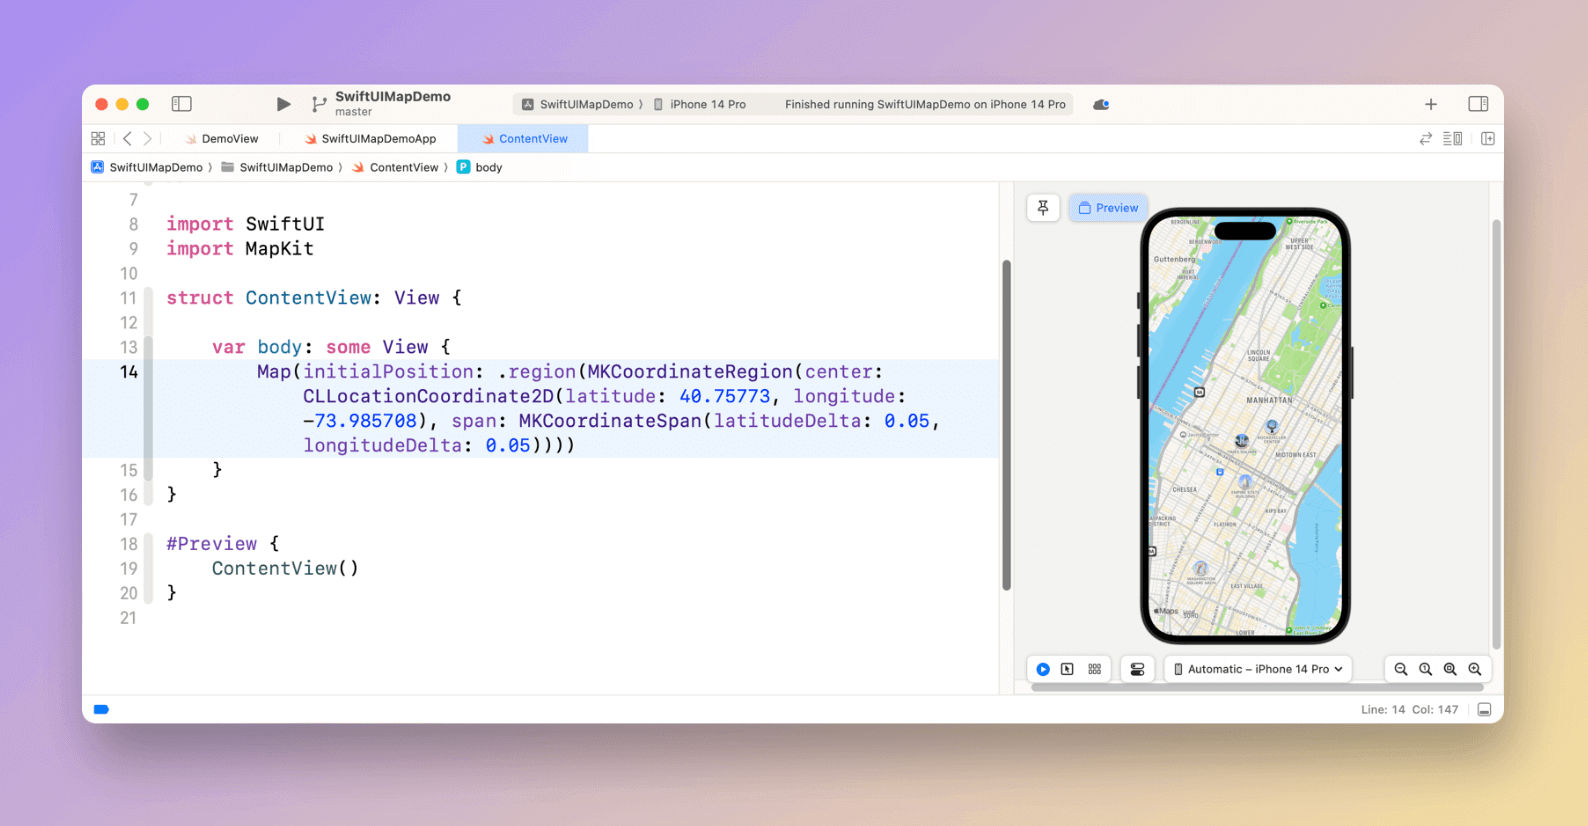 swiftui-maps-initial-position